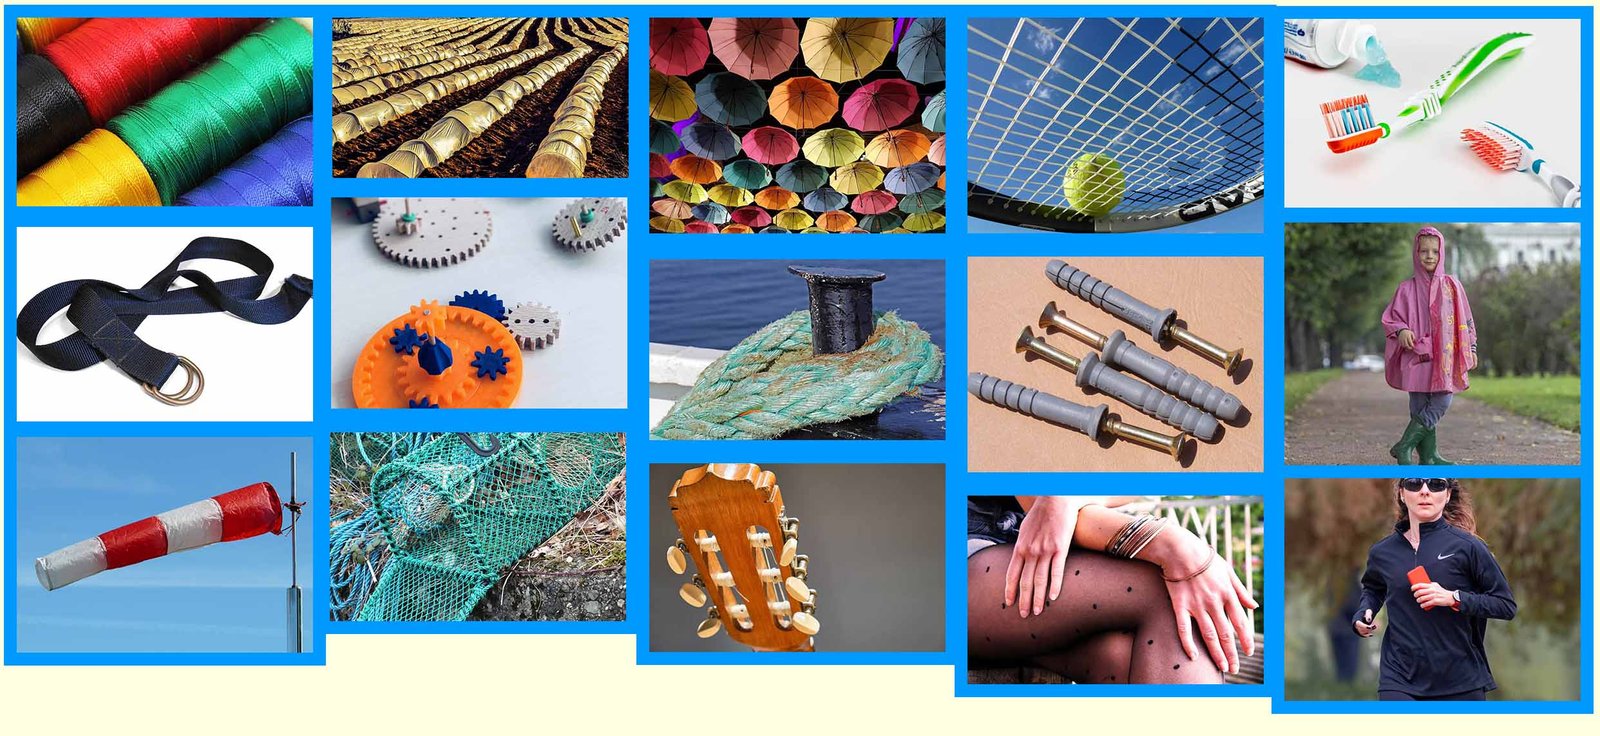 Photo montage of items made from nylon.